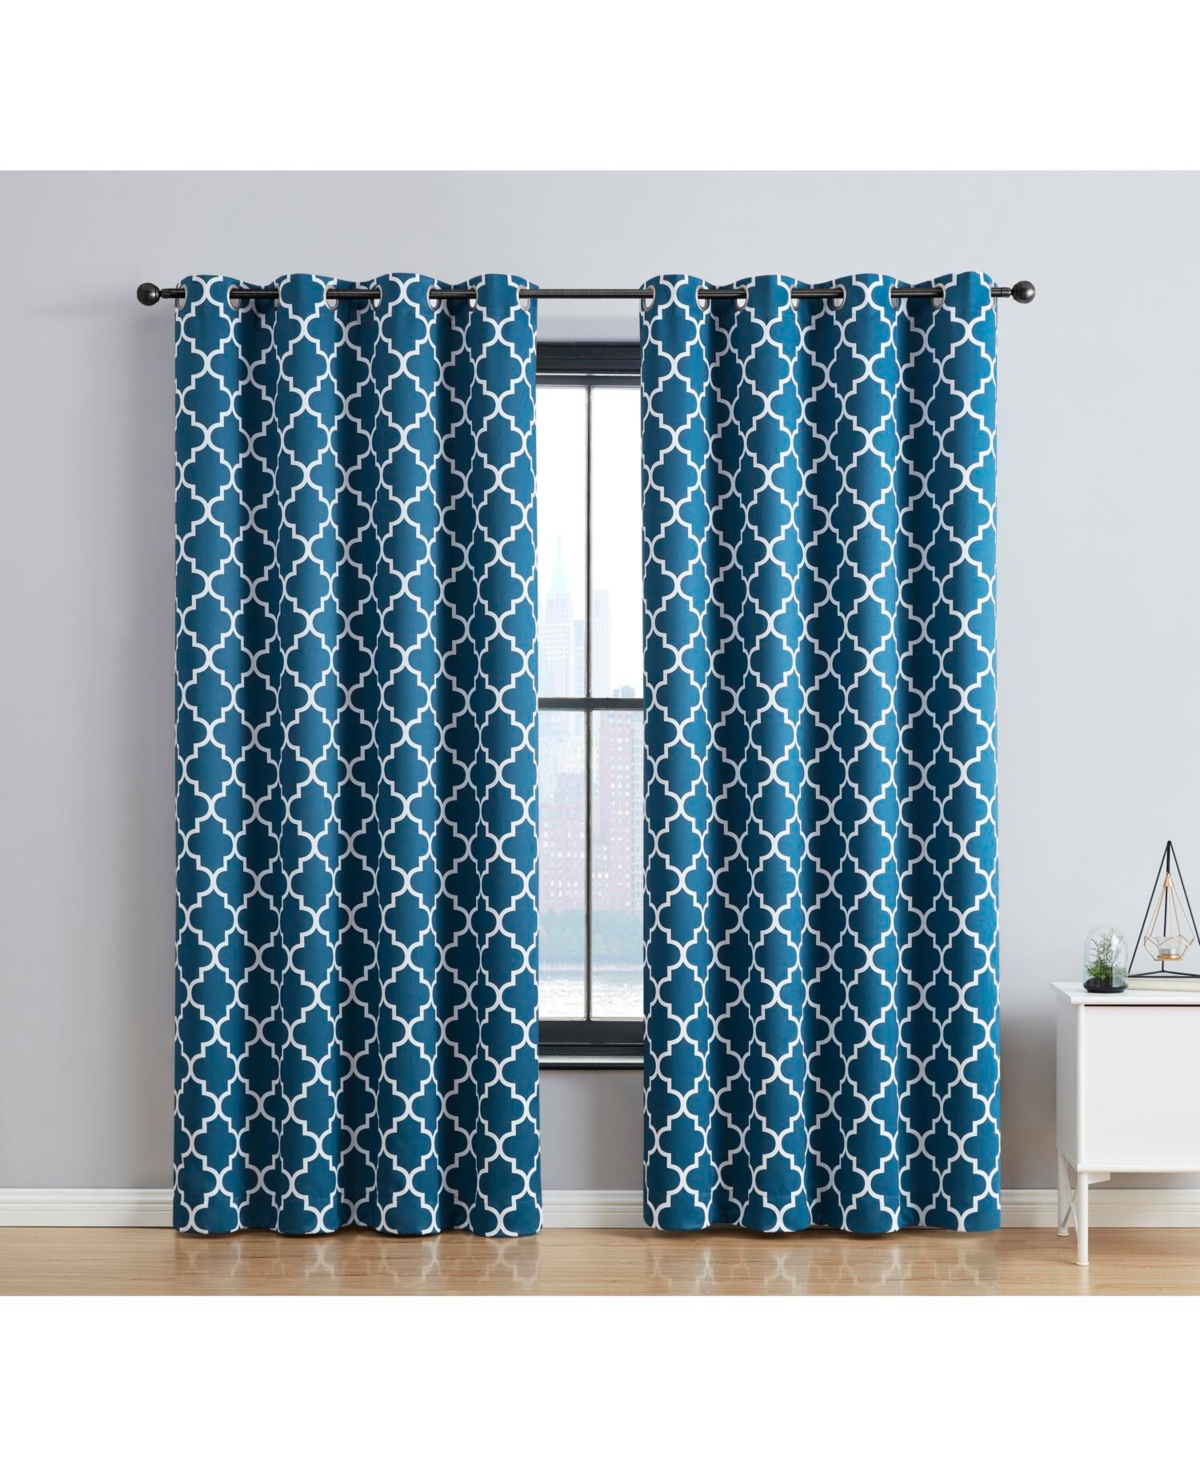 Lattice Print Drape Blackout Curtains Pattern - Weather Insulated Curtains, Sun Blocking Window Treatment Draperies for Living Room - Set of 2